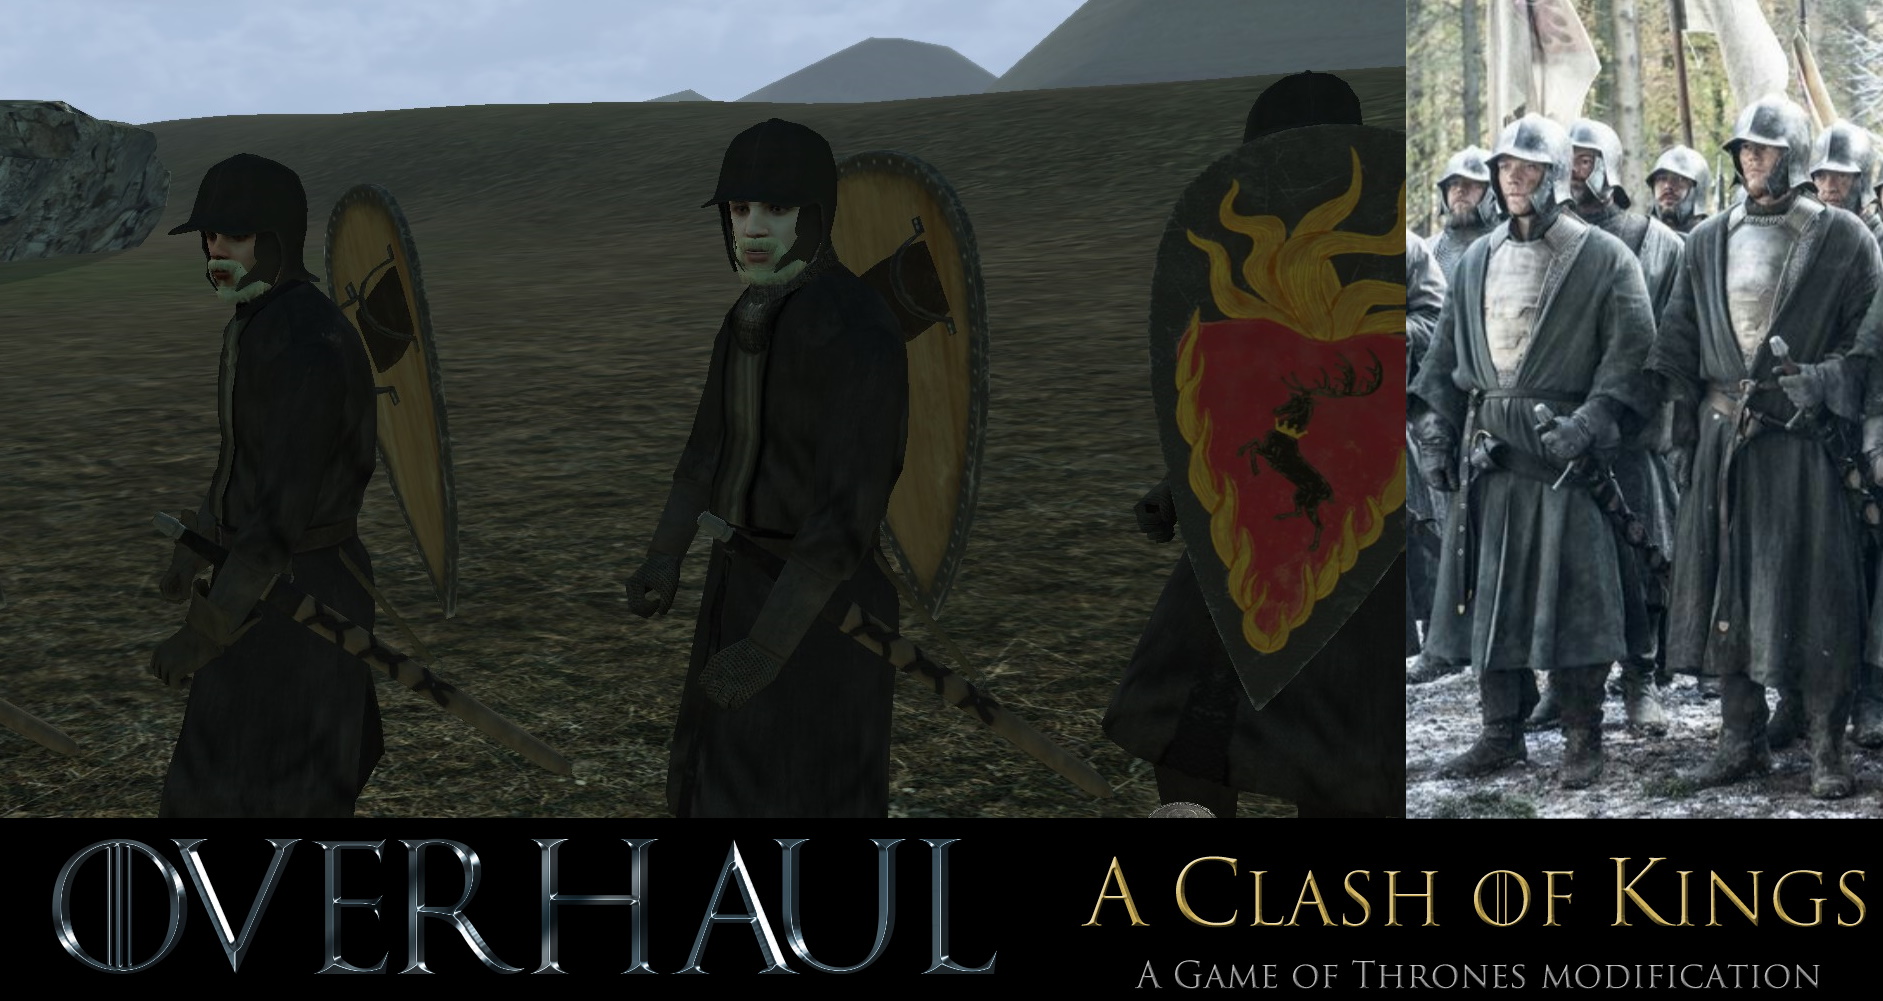 A Clash of Kings (ACOK) Optimized Textures (6.0) at Mount & Blade Warband  Nexus - Mods and community